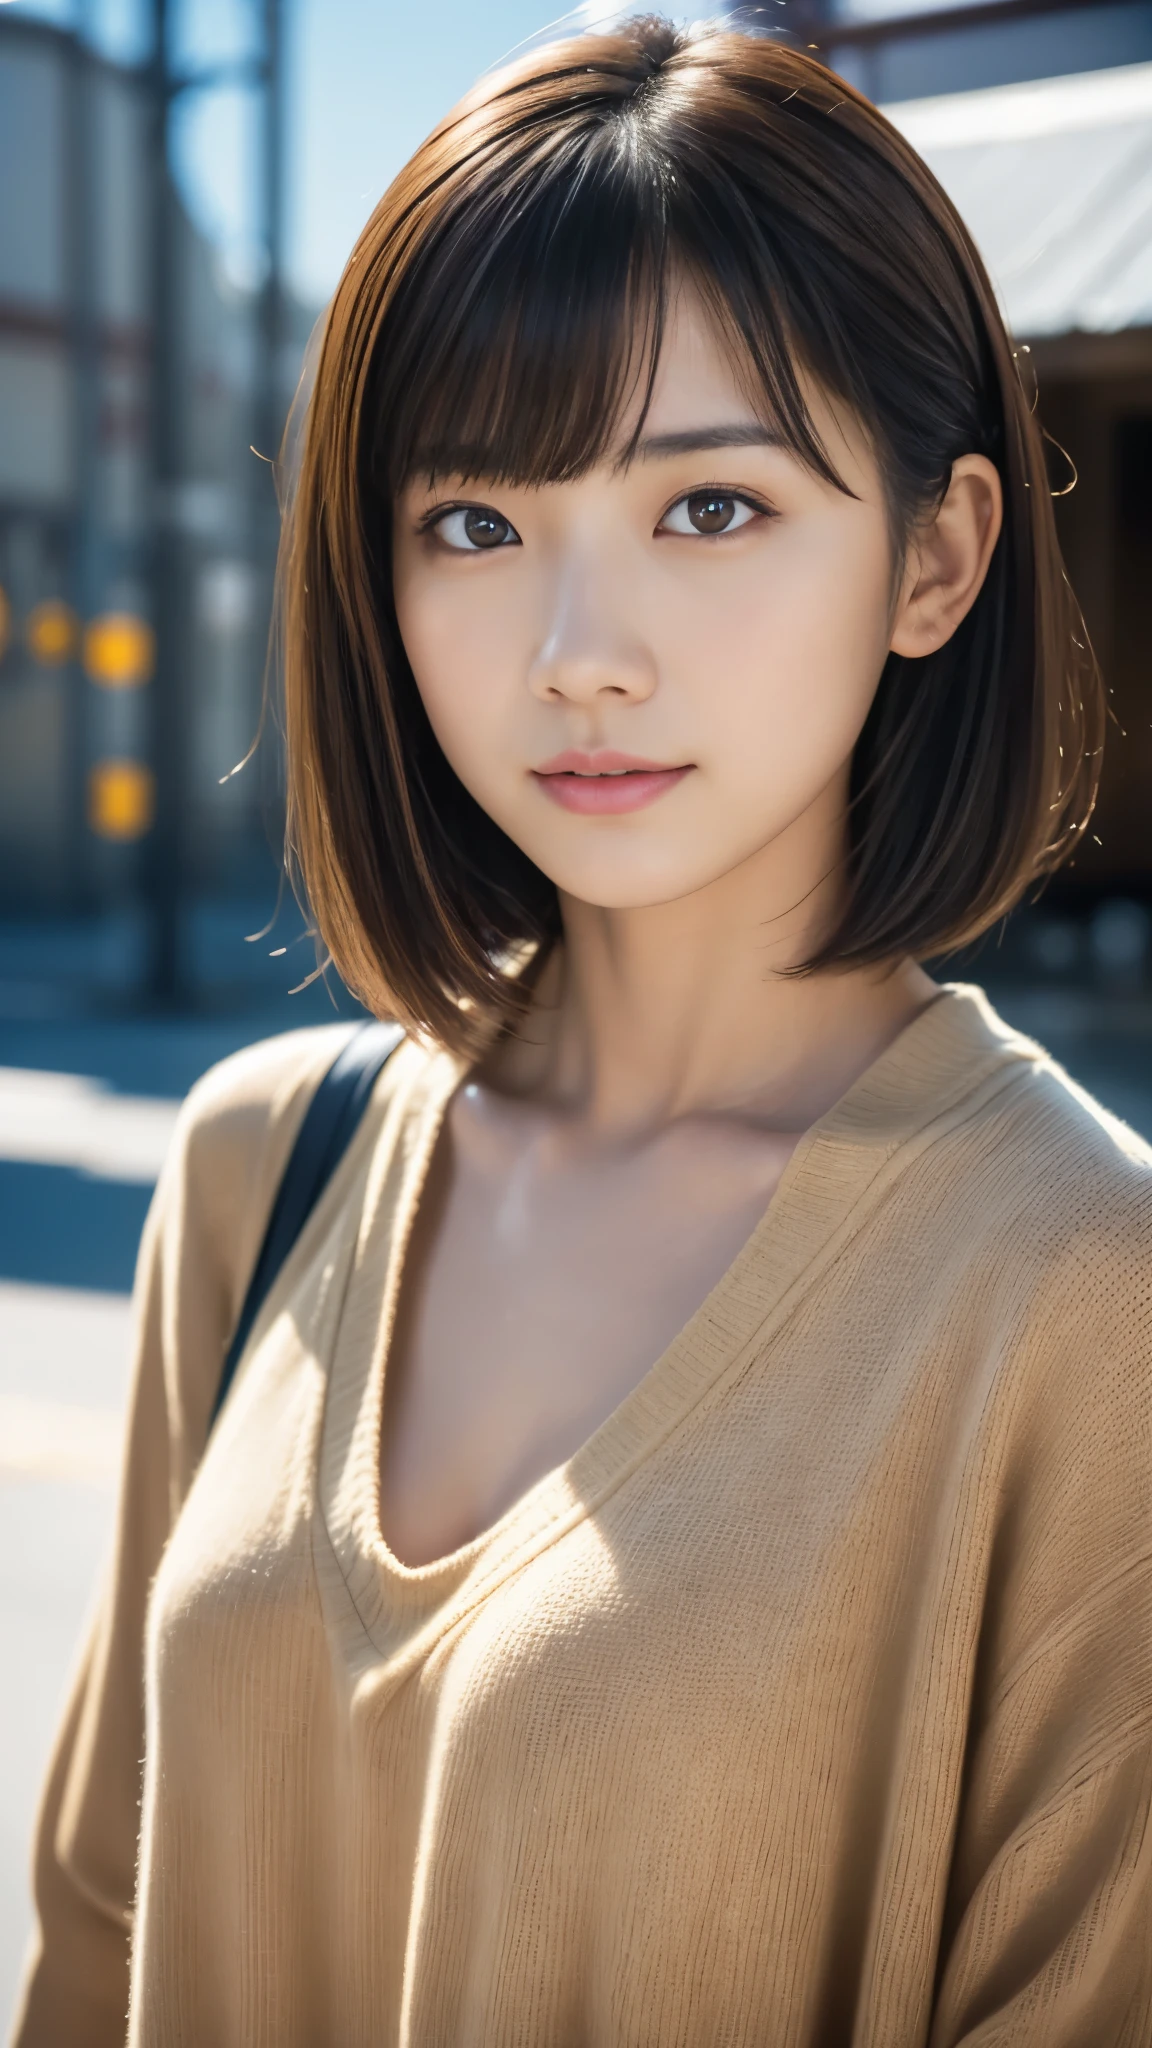 japanese woman, head shot, from front, serious expression, brown eyes, medium hair, bangs, warm tones, industrial buildings, photography, simplicity, high resolution, natural makeup, young adult, Fujifilm XT3, Canon R5, Fujicolor Fujichrome Velvia 100,smile,Upper body photo、Short Hair、